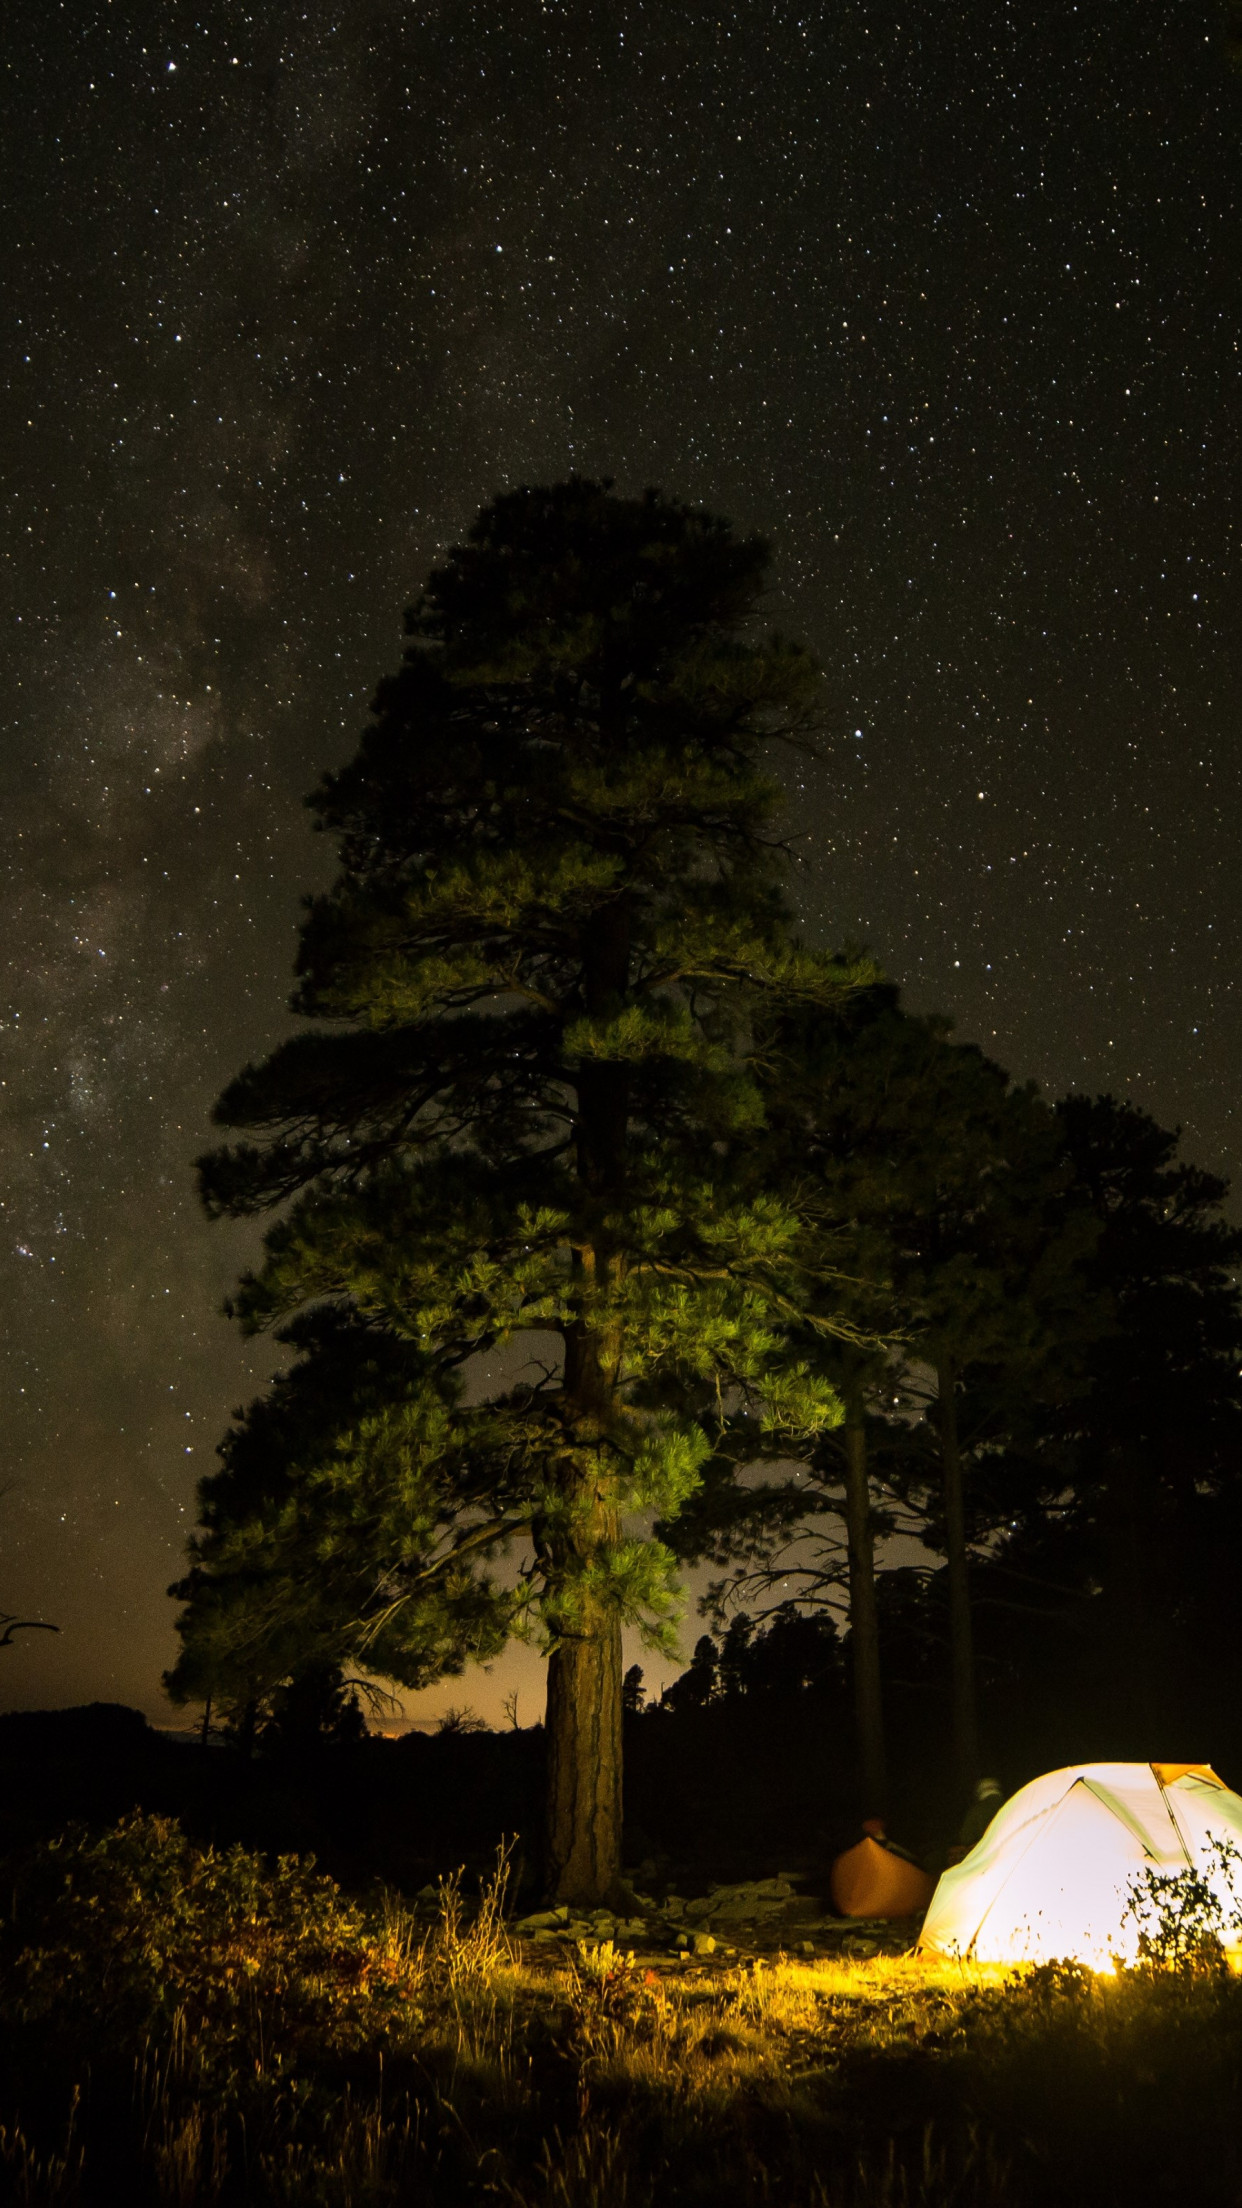 Download wallpaper: With tent under the night sky 1242x2208